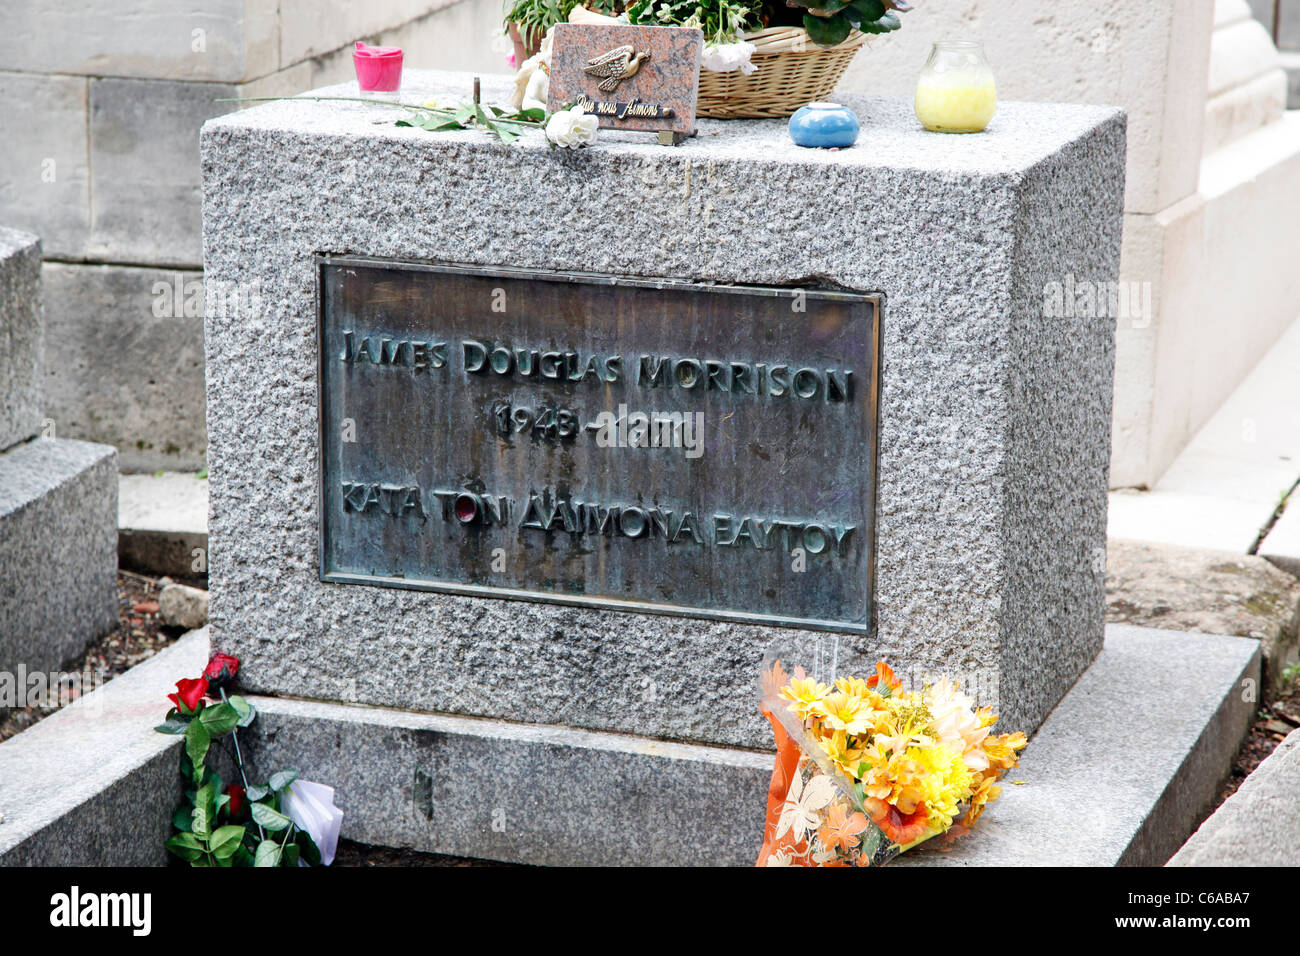 Grave of Jim Morrison of the Doors at Pere Lachaise cemetery in Paris, France Stock Photo